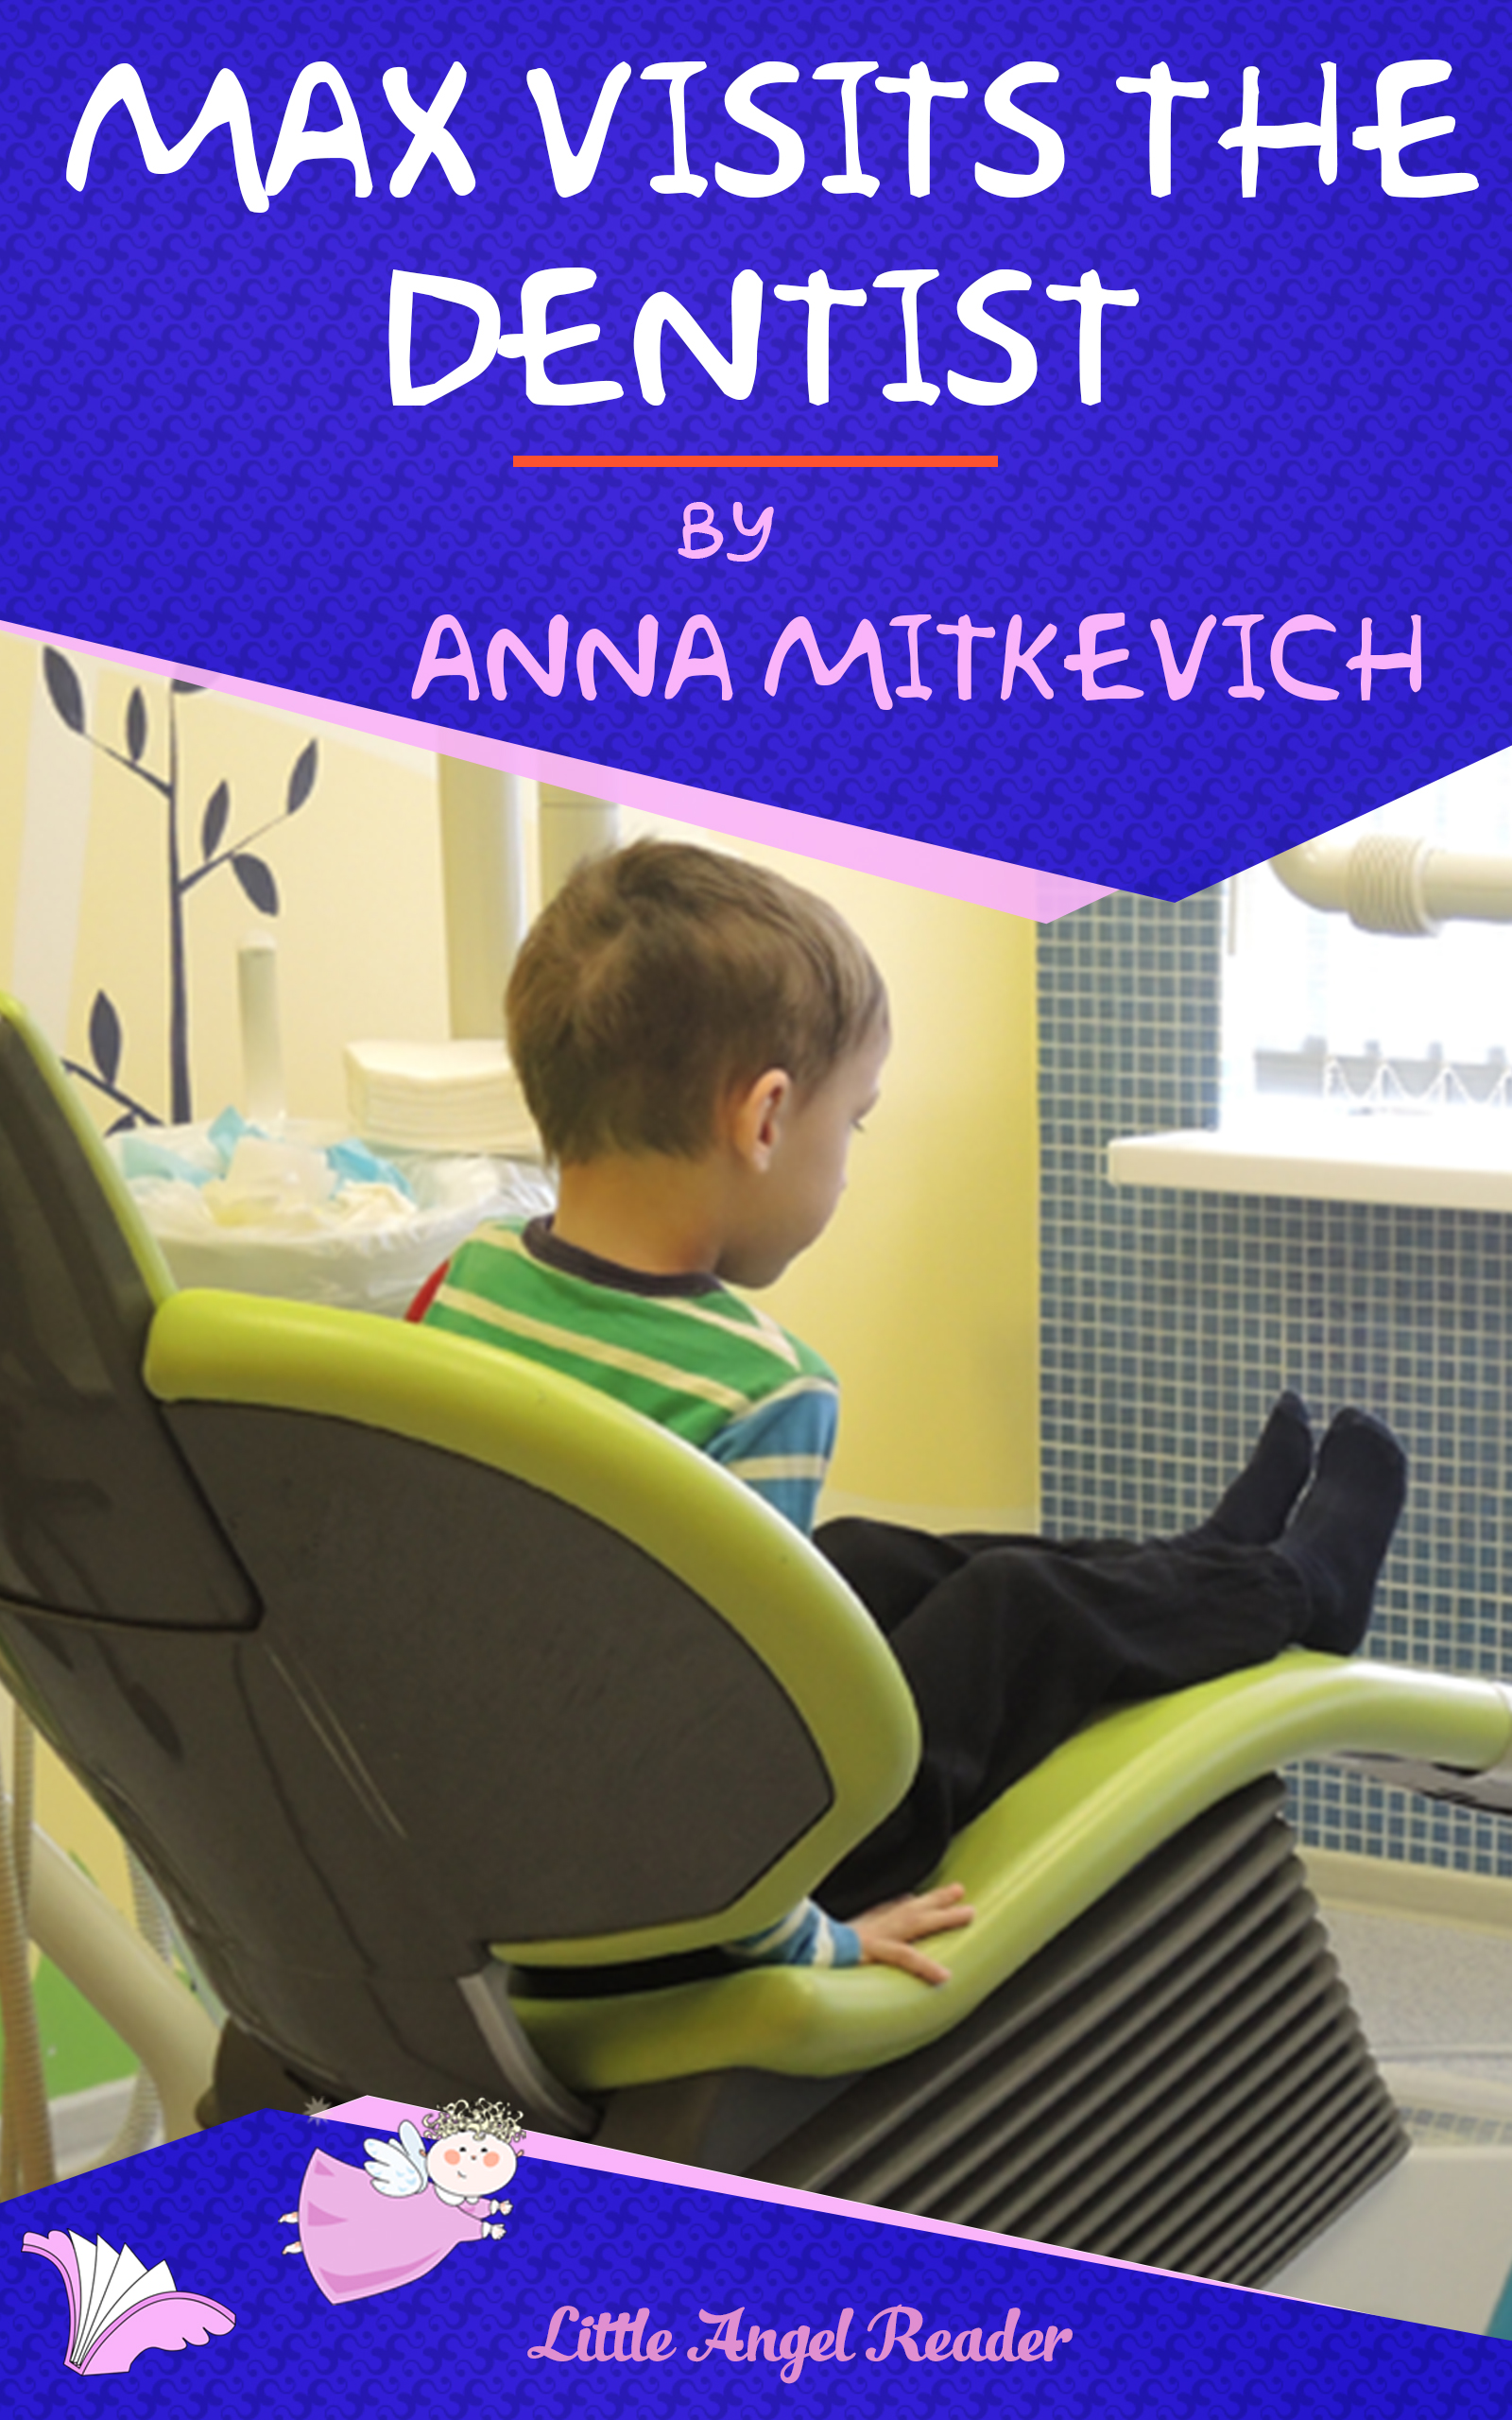 FREE: Max Visits the Dentist by Anna Mitkevich